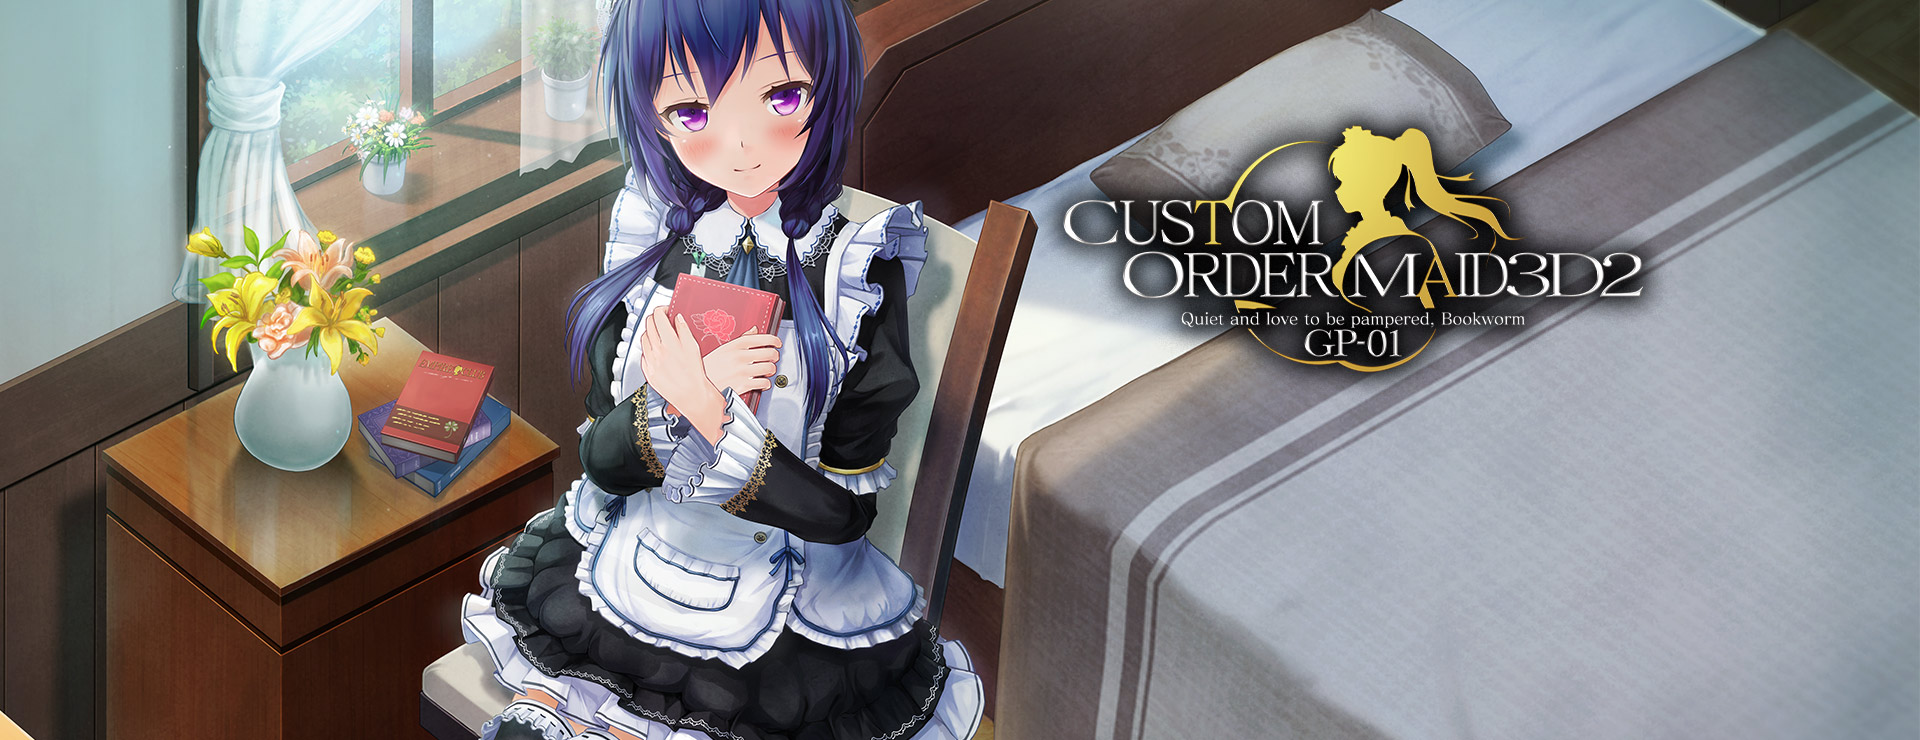 Custom Order Maid 3D2 - Quiet and love to be pampered Bookworm GP-01 DLC - Simulation Jeu